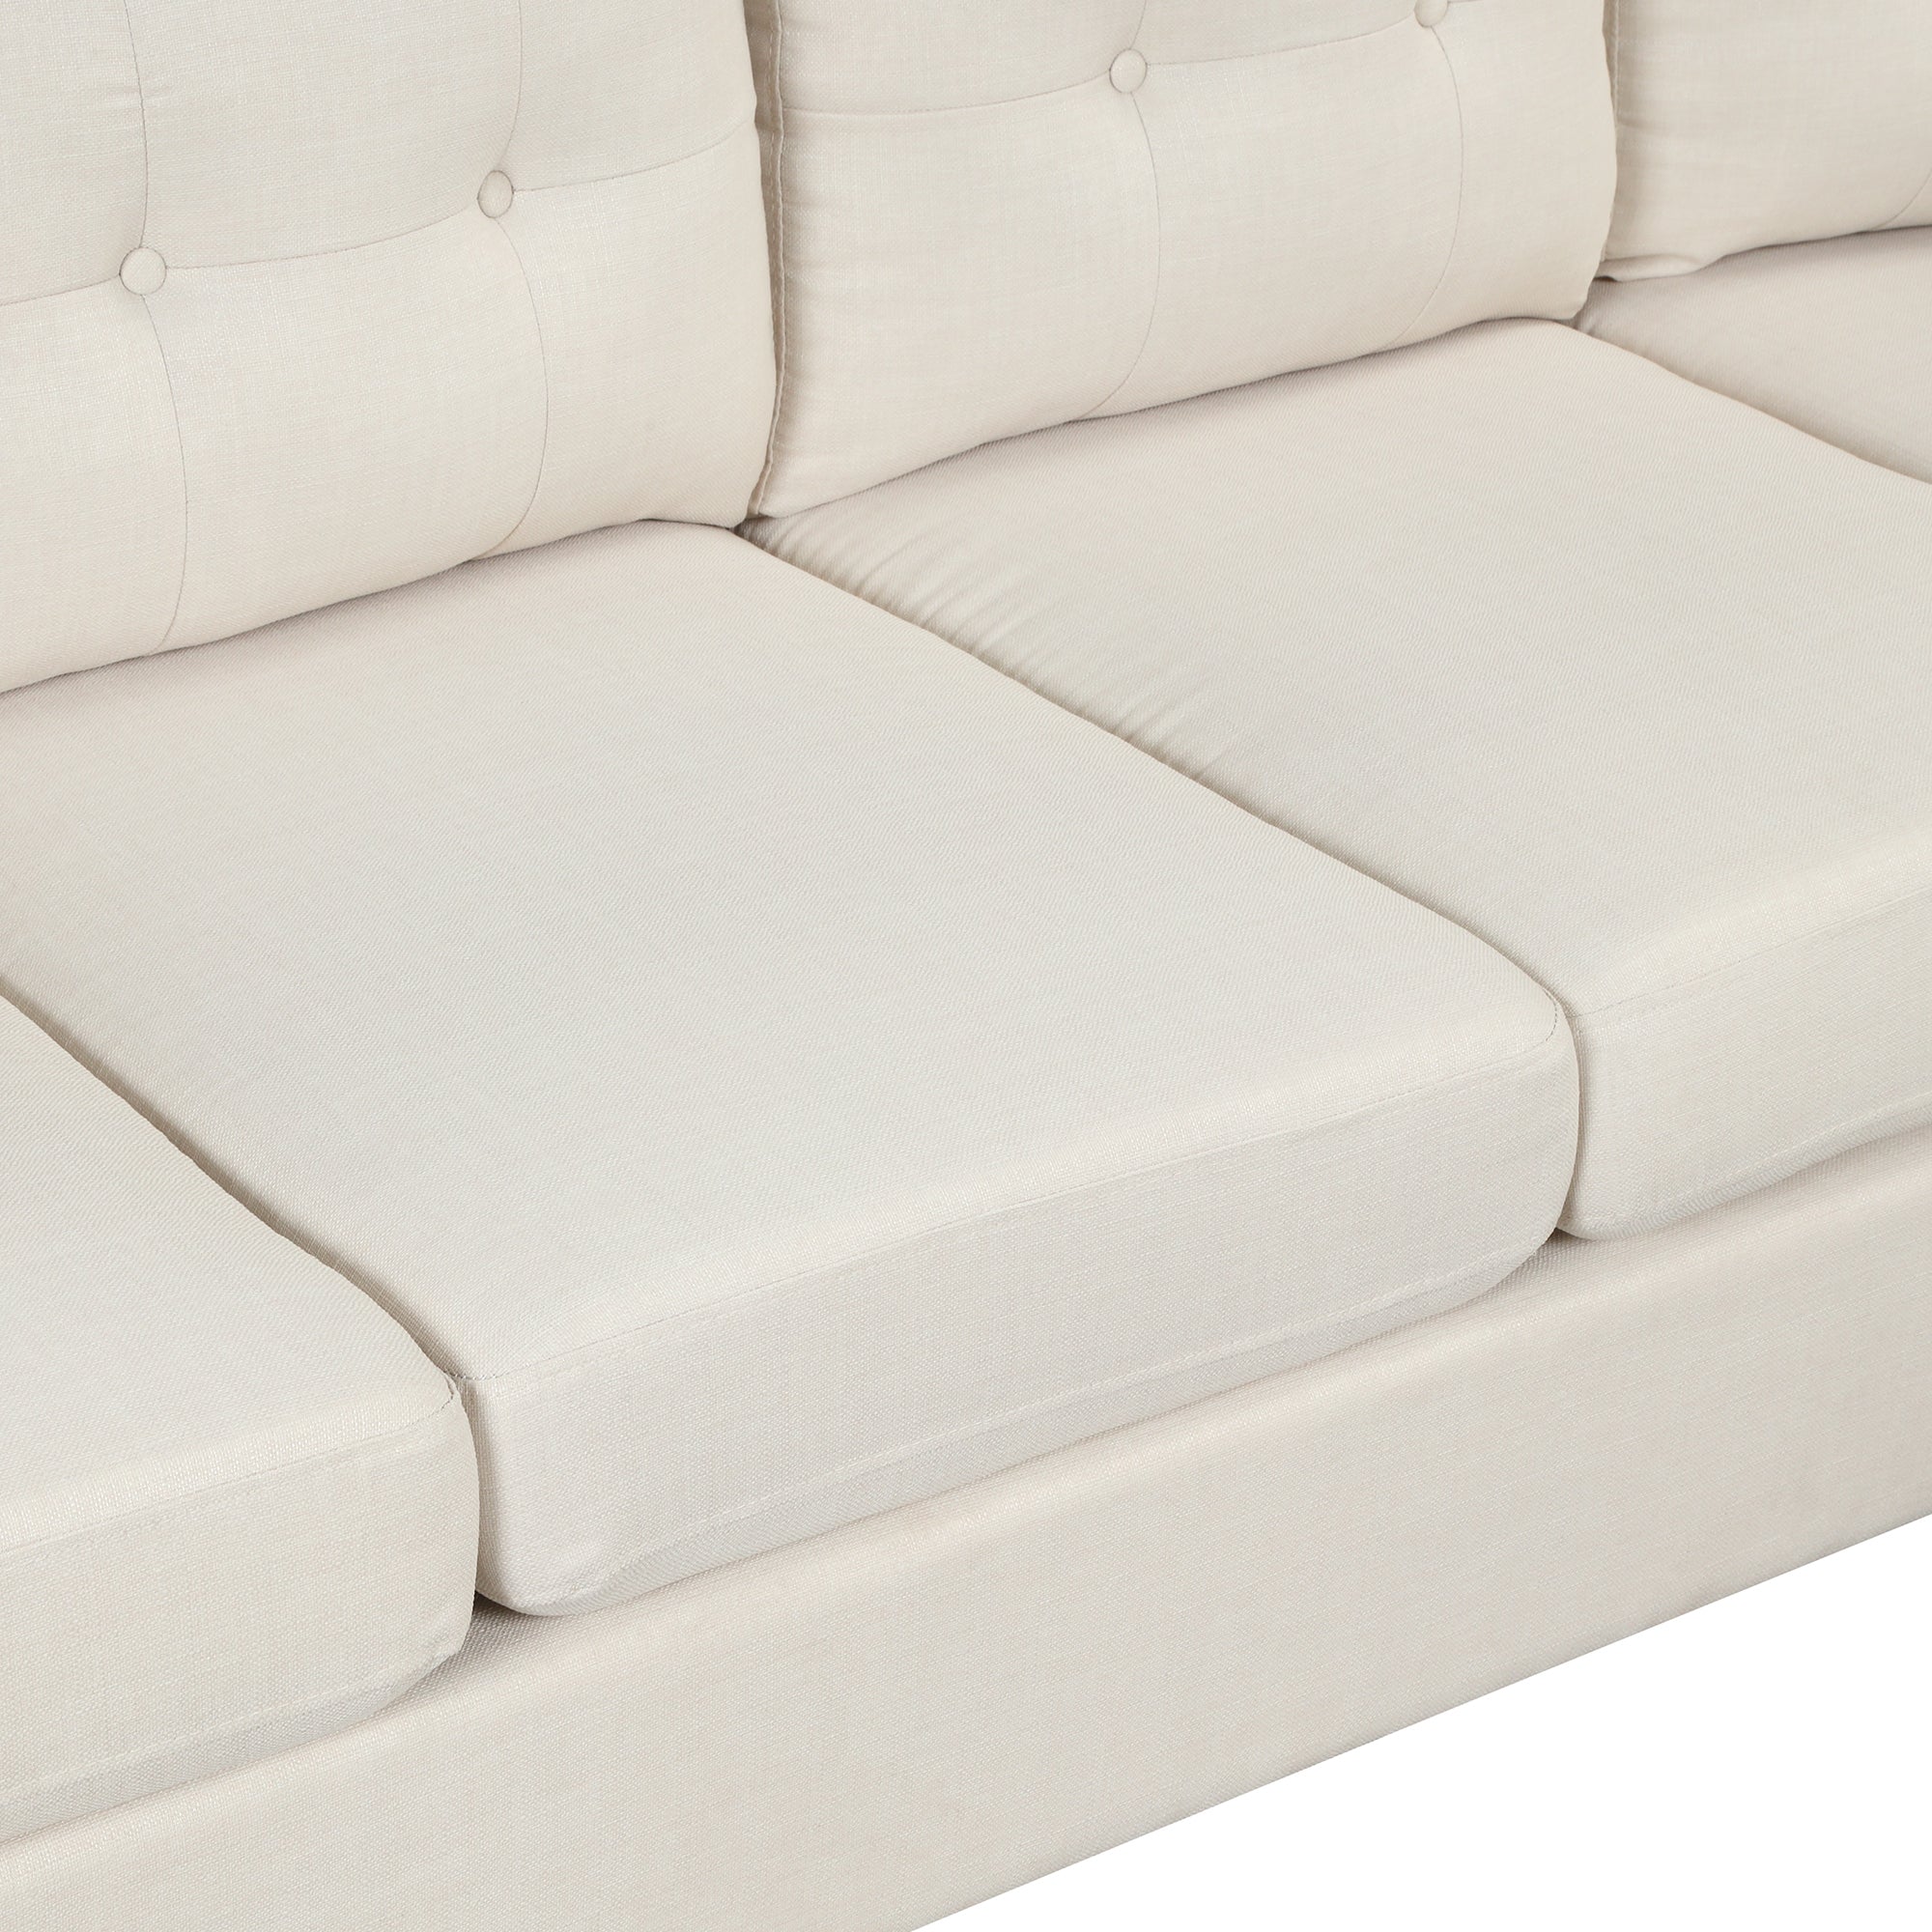 Modern Linen L-Shaped Sectional Sofa with Chaise - Beige-Sofas-American Furniture Outlet